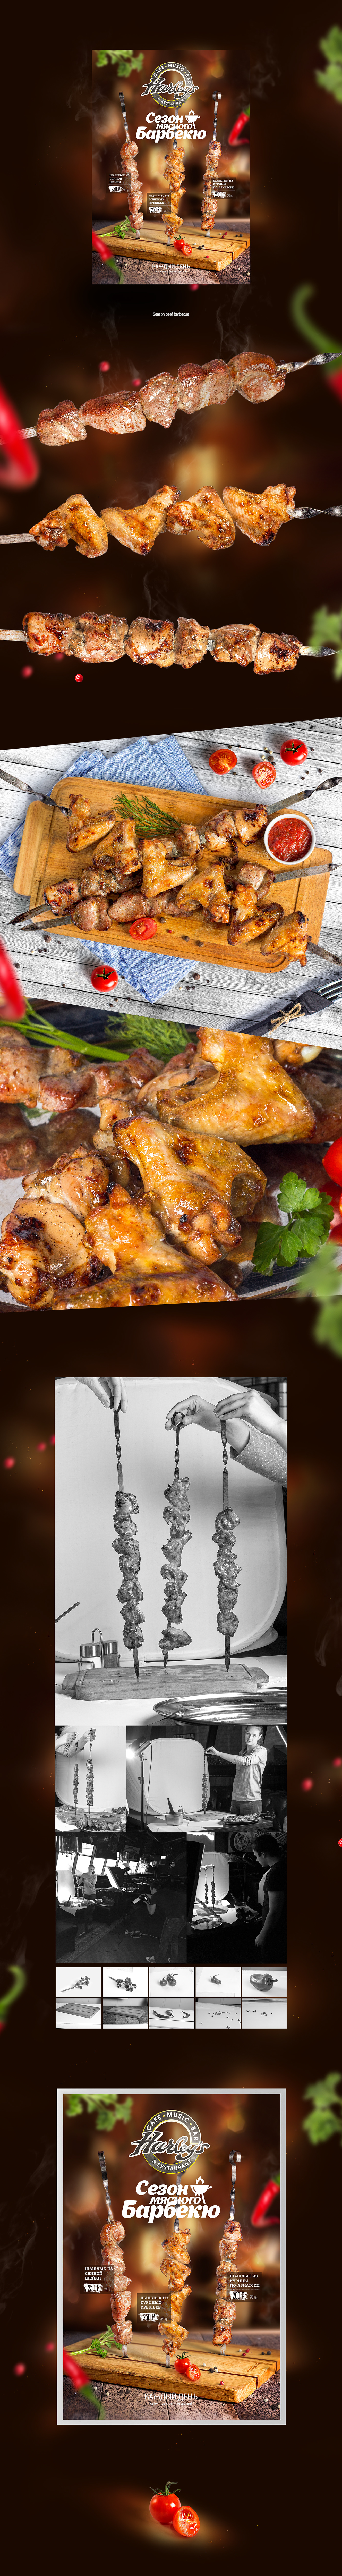 meat barbecue BBQ restaurant Food  photo Harley's chicken skewers bar Russia food style tasty retouch poster